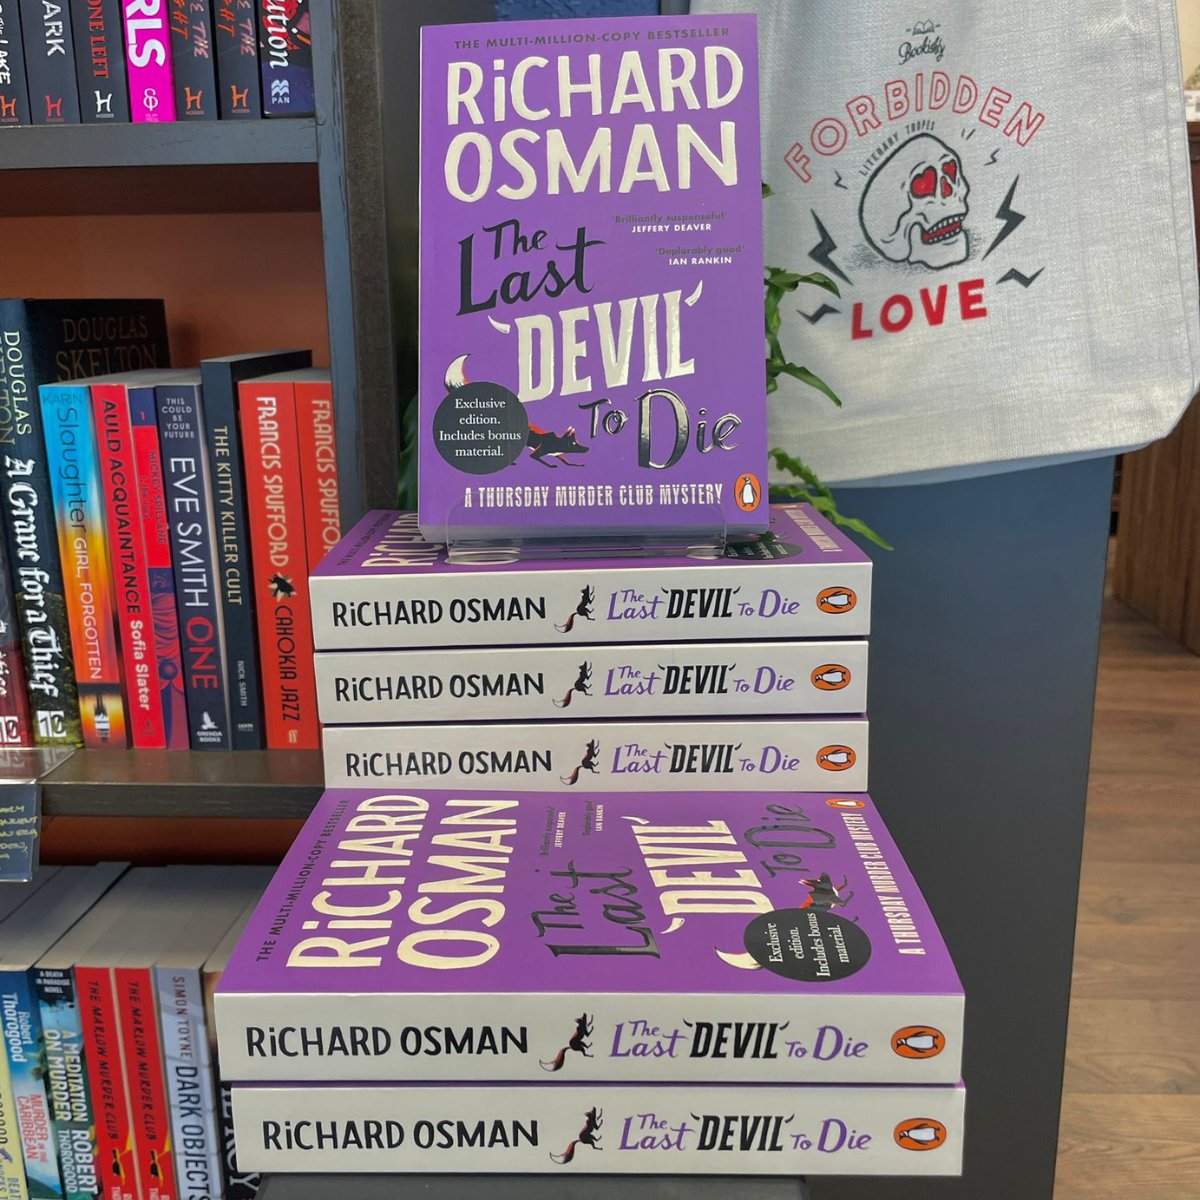 📚 The highly anticipated 4th book in Richard Osman's beloved Thursday Murder Club series, 'The Last Devil to Die', is out TODAY! 🎉

🟣We've got special indie bookshop edition copies hot off the press and ready for you to devour. 

#RichardOsman #TheLastDeviltoDie